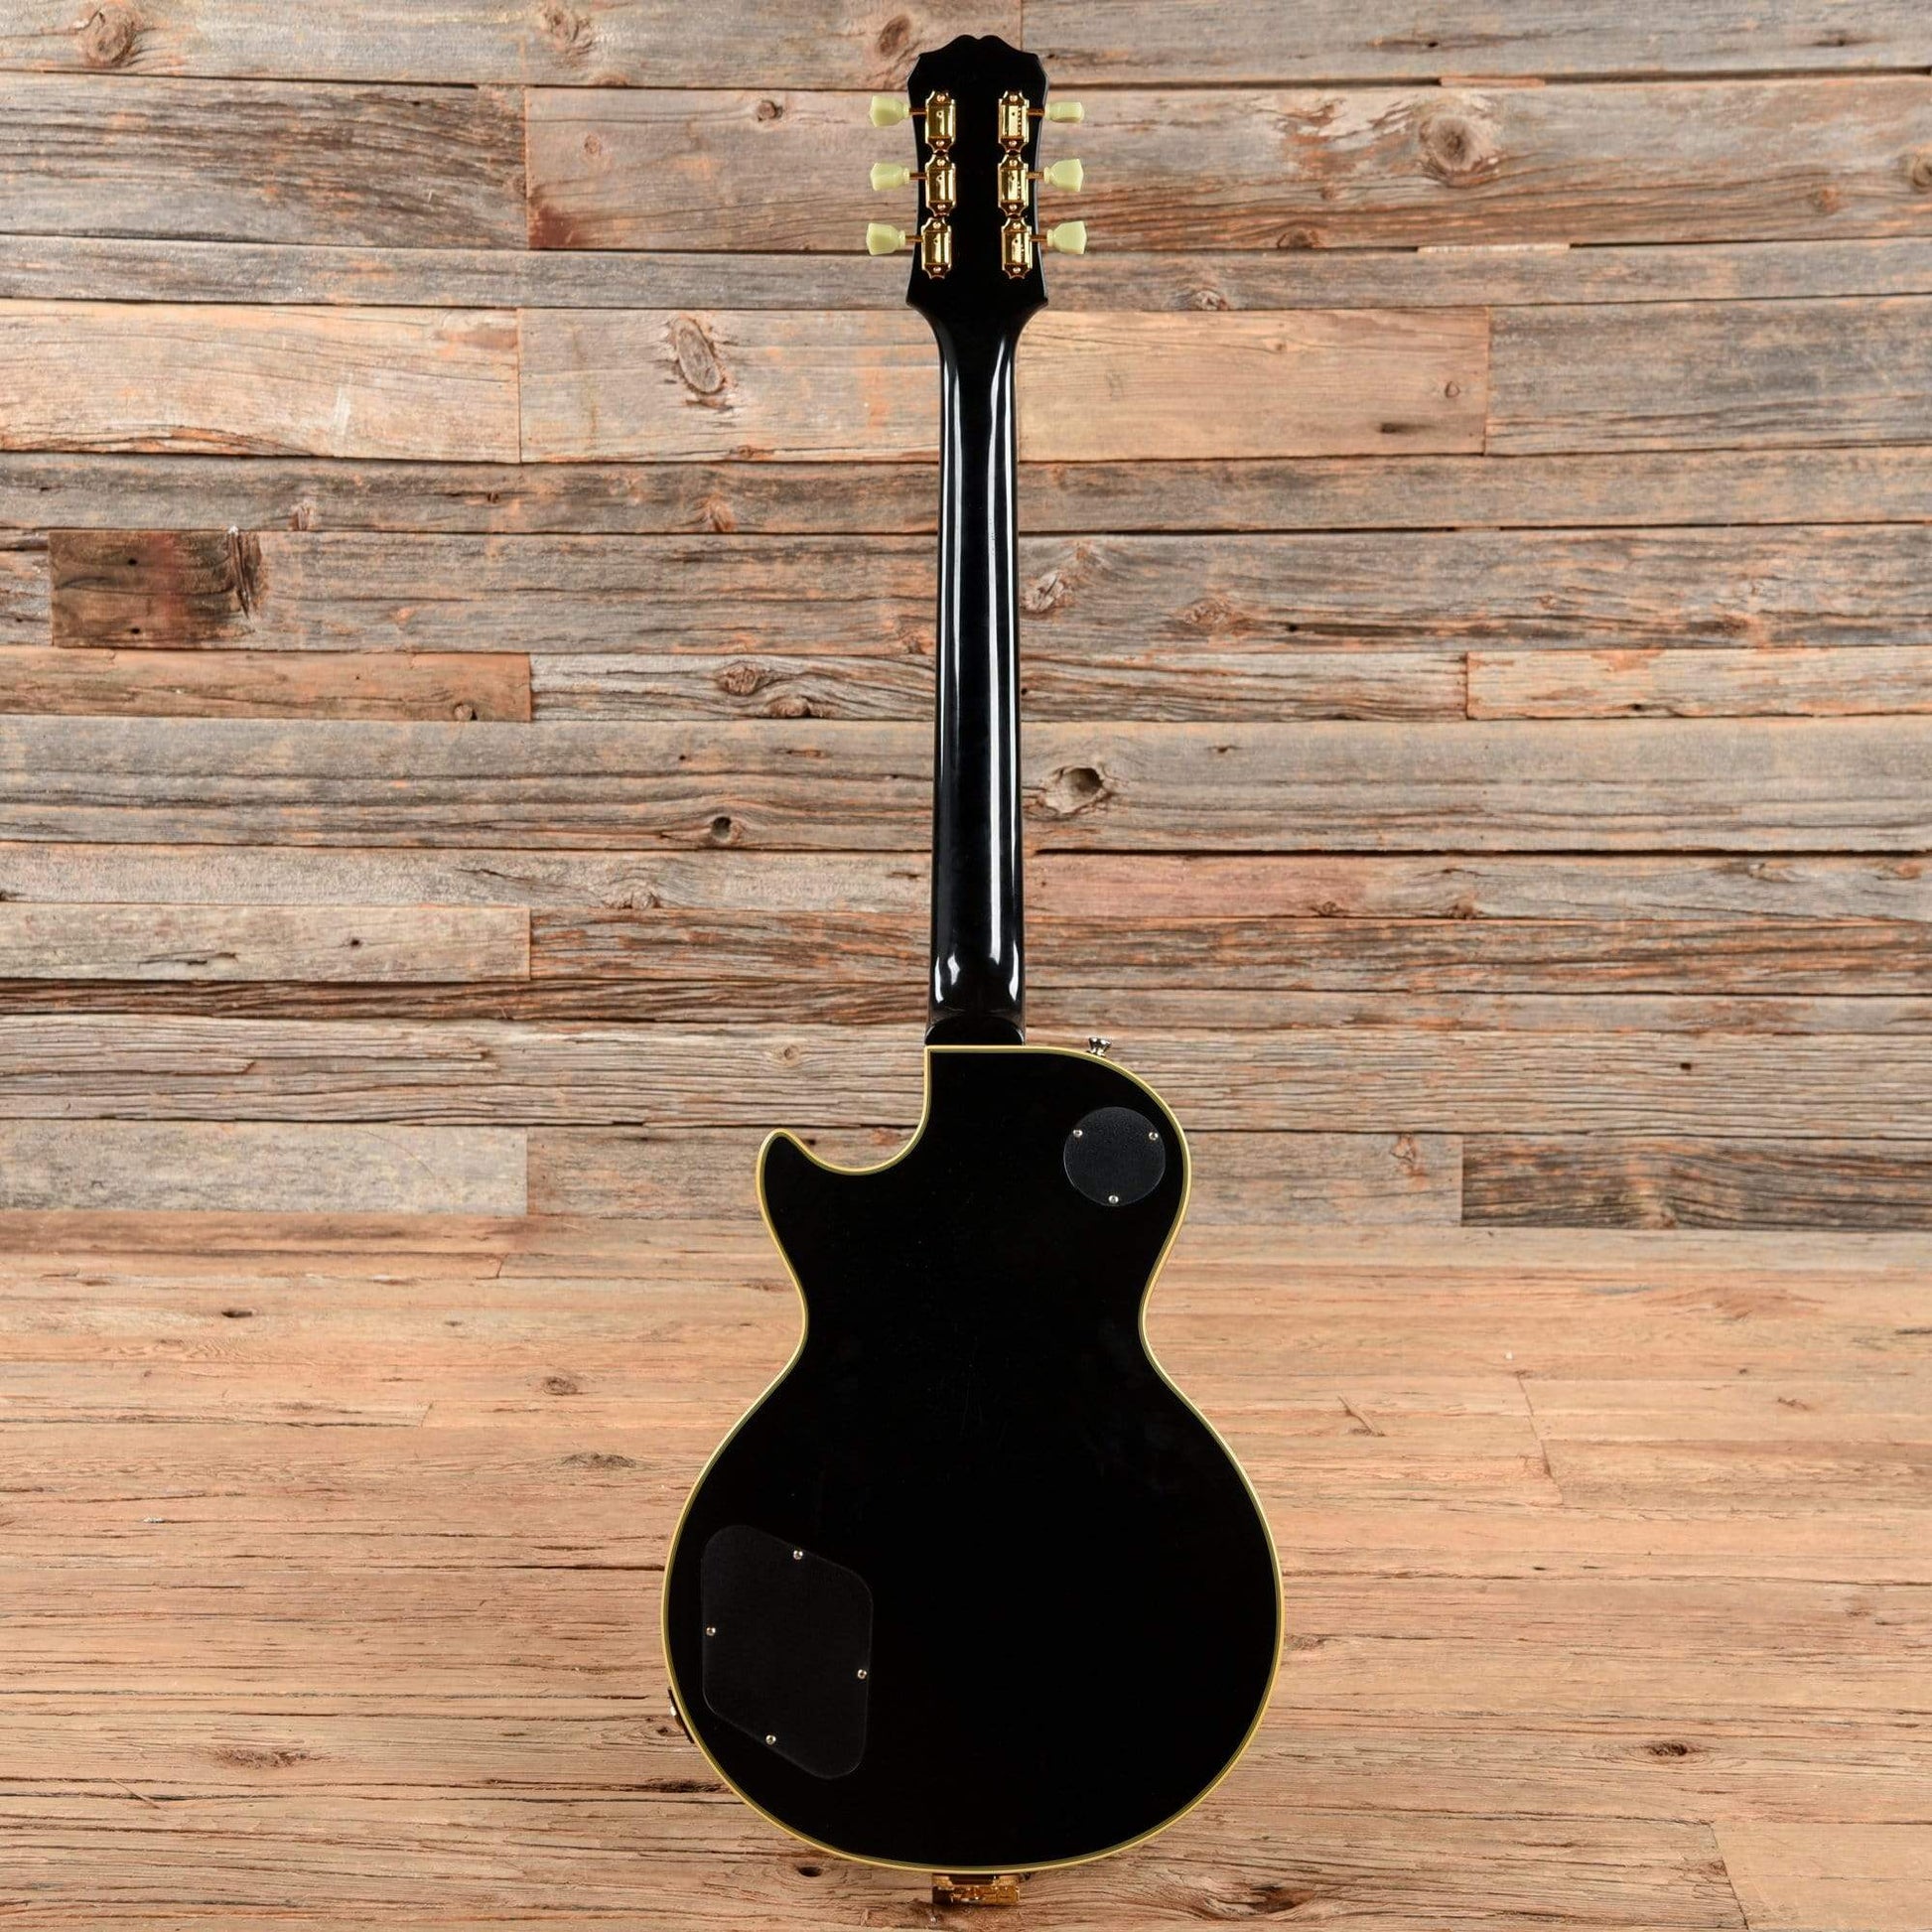 Epiphone Inspired by "1955" Les Paul Custom Outfit Black 2016 Electric Guitars / Solid Body